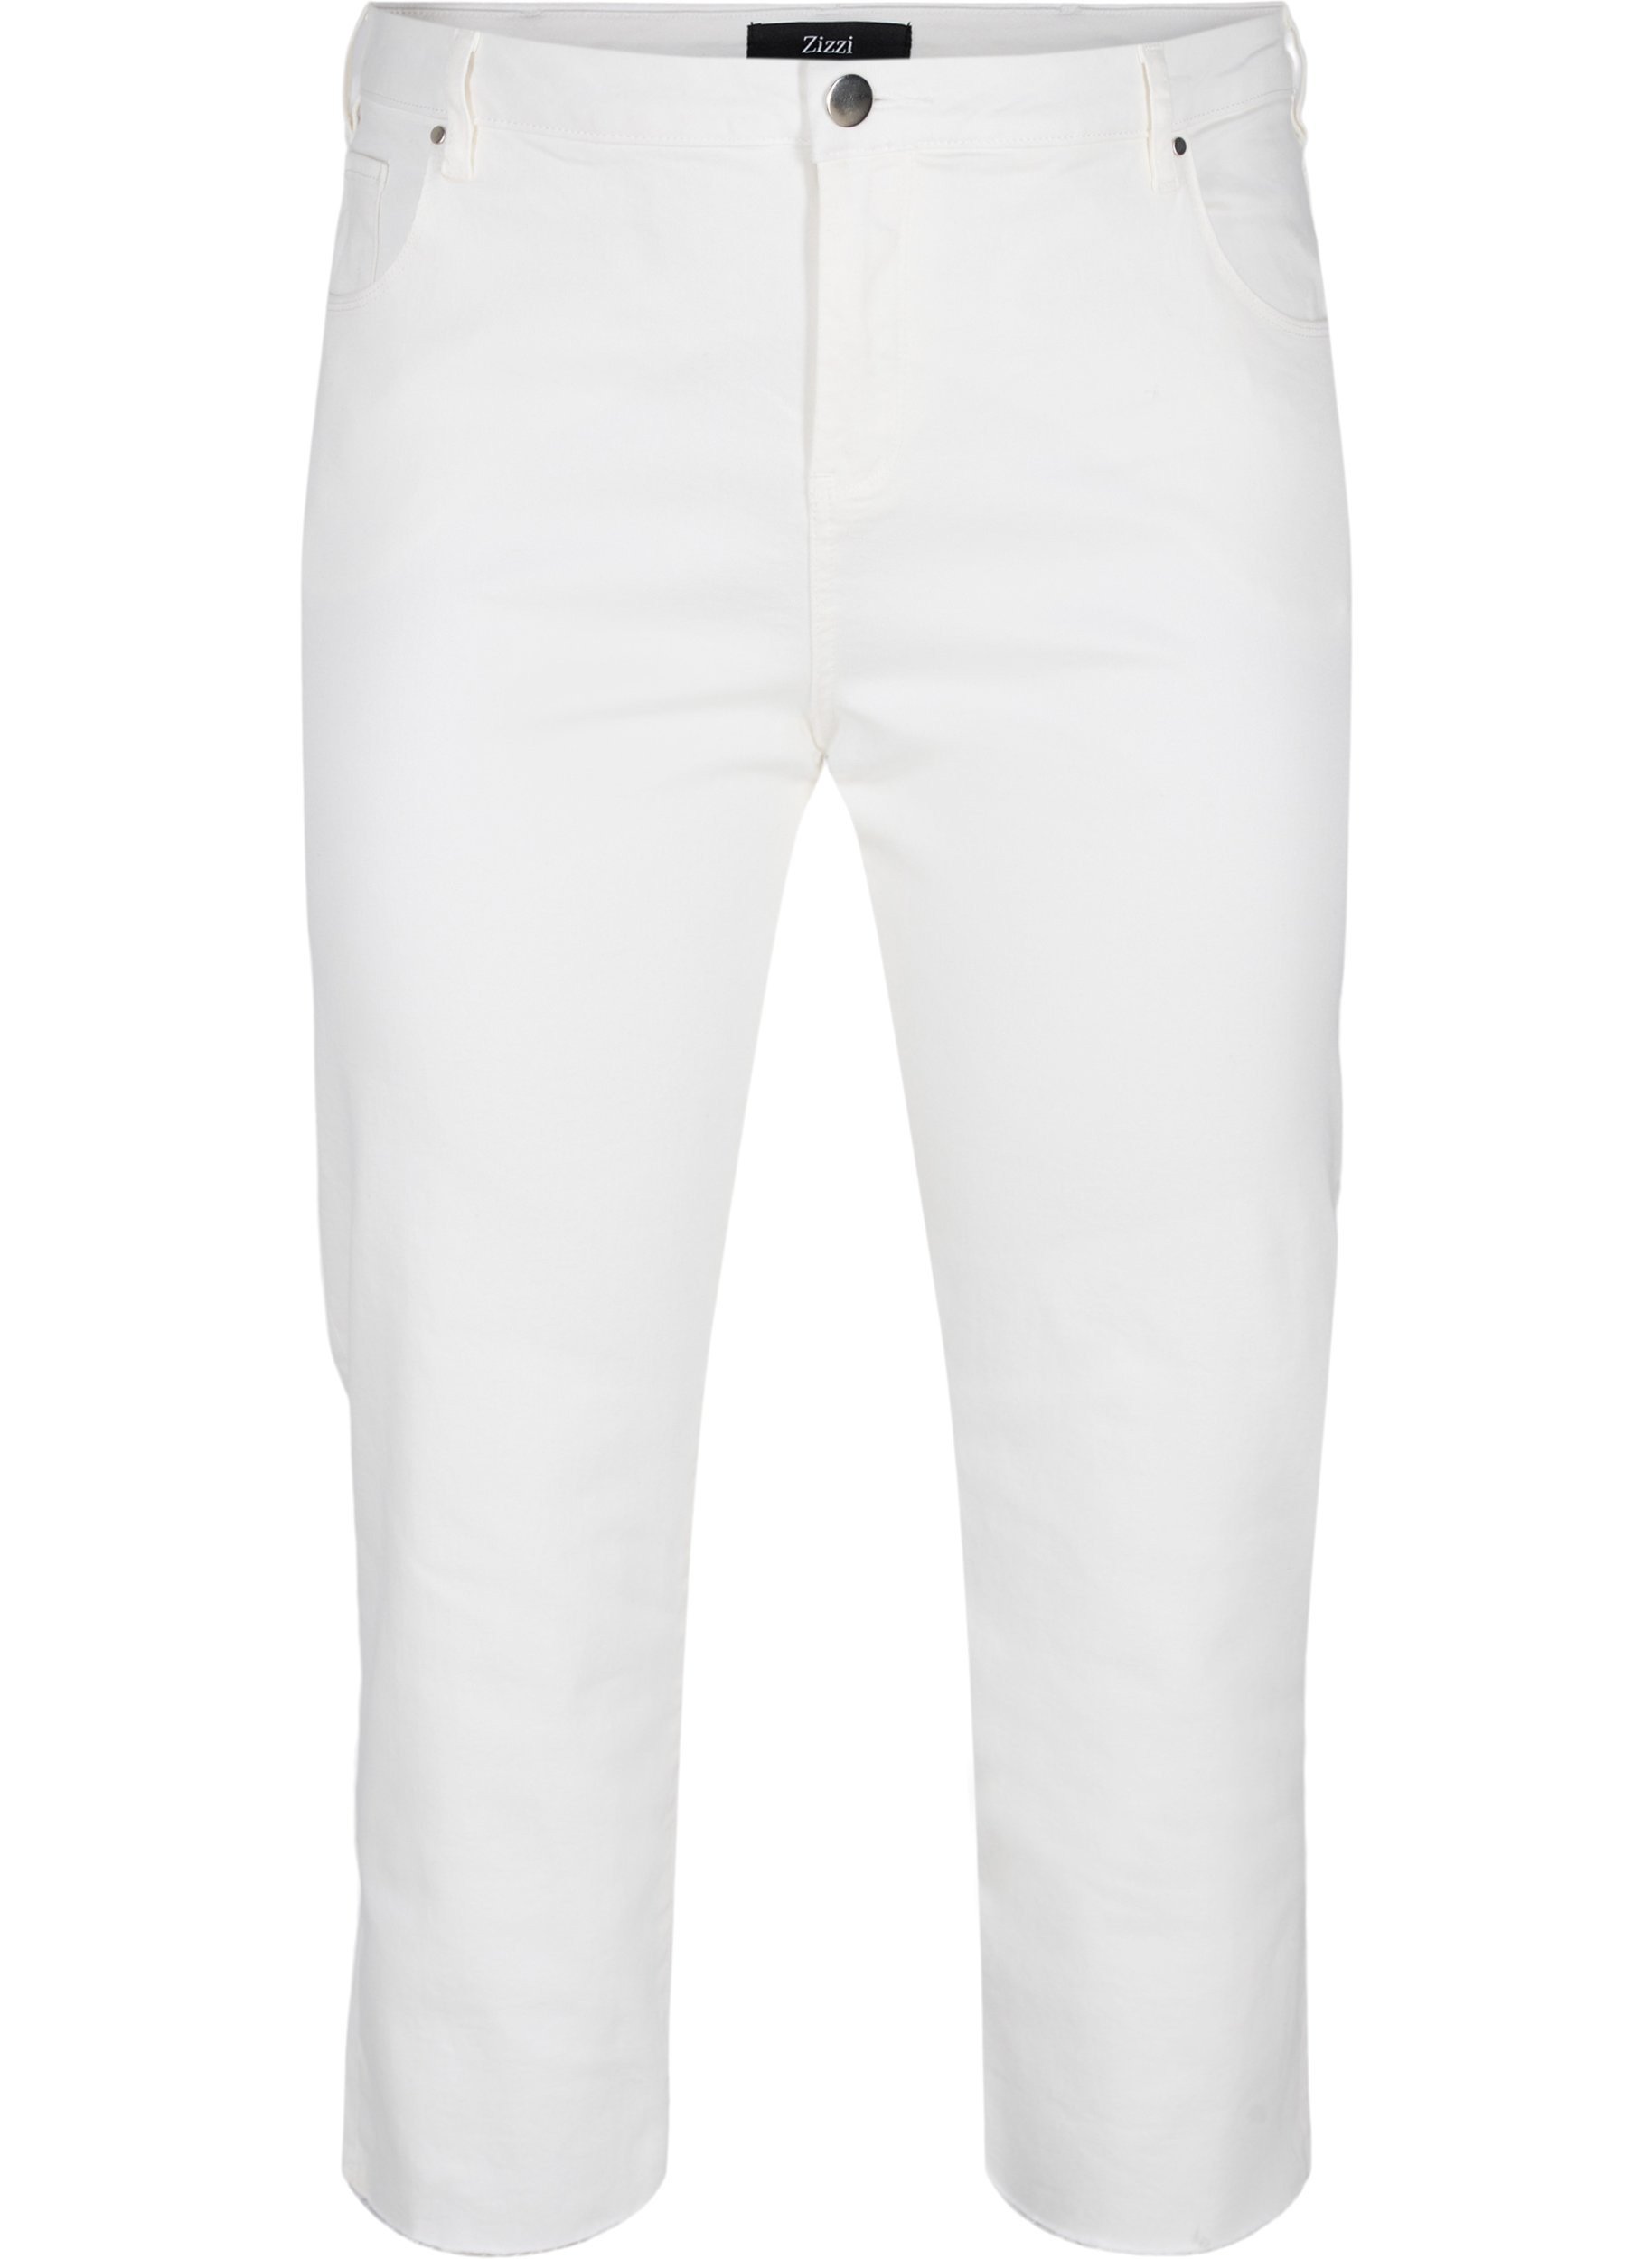 7/8 jeans with raw hems and high waist, White